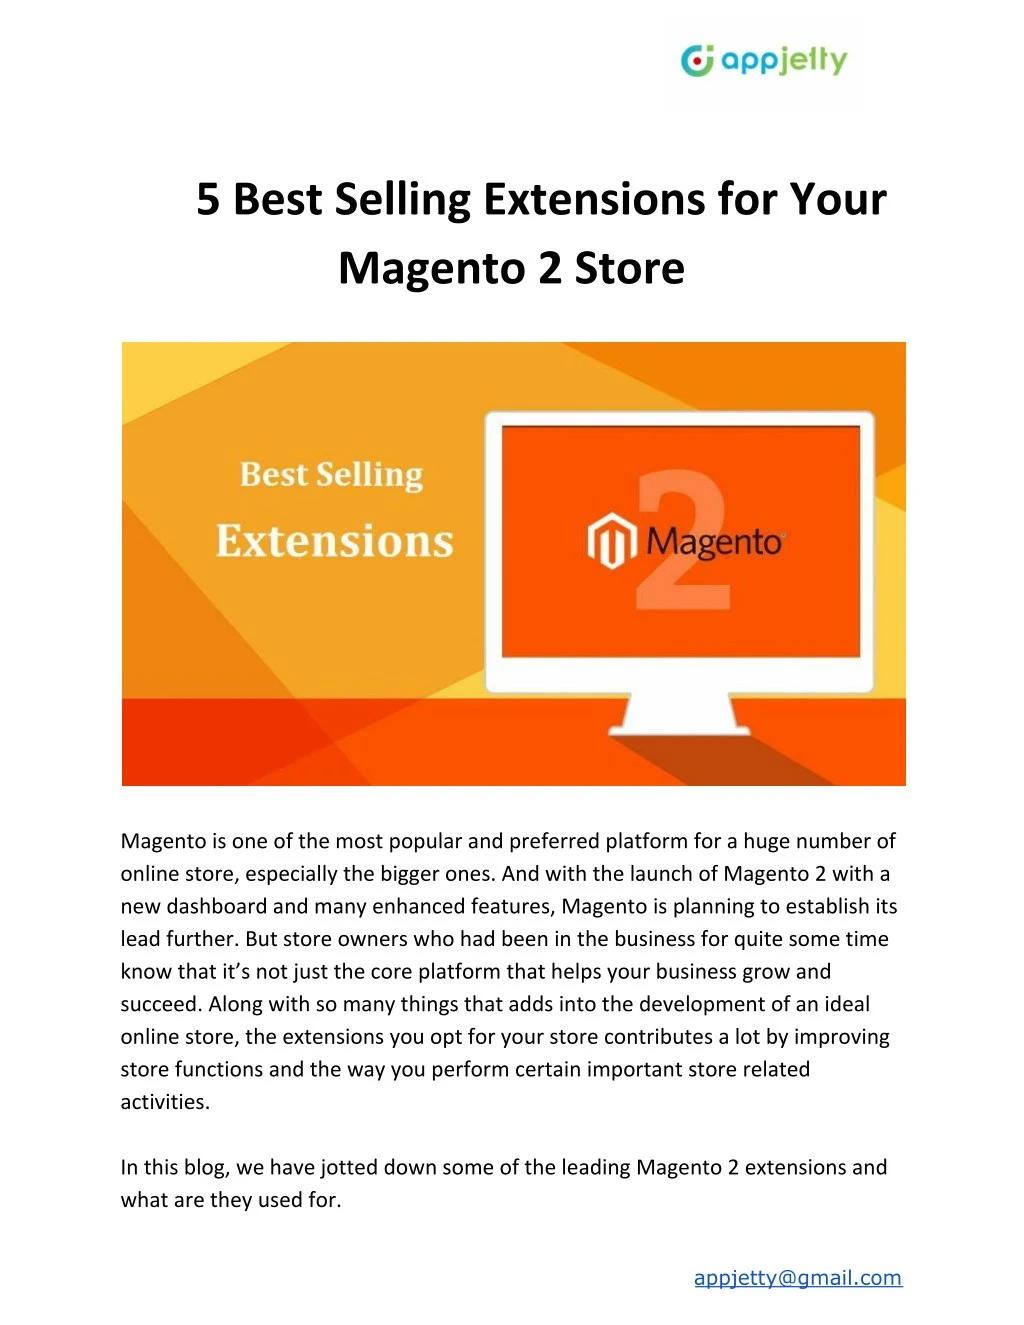 5 best selling extensions for your magento 2 store